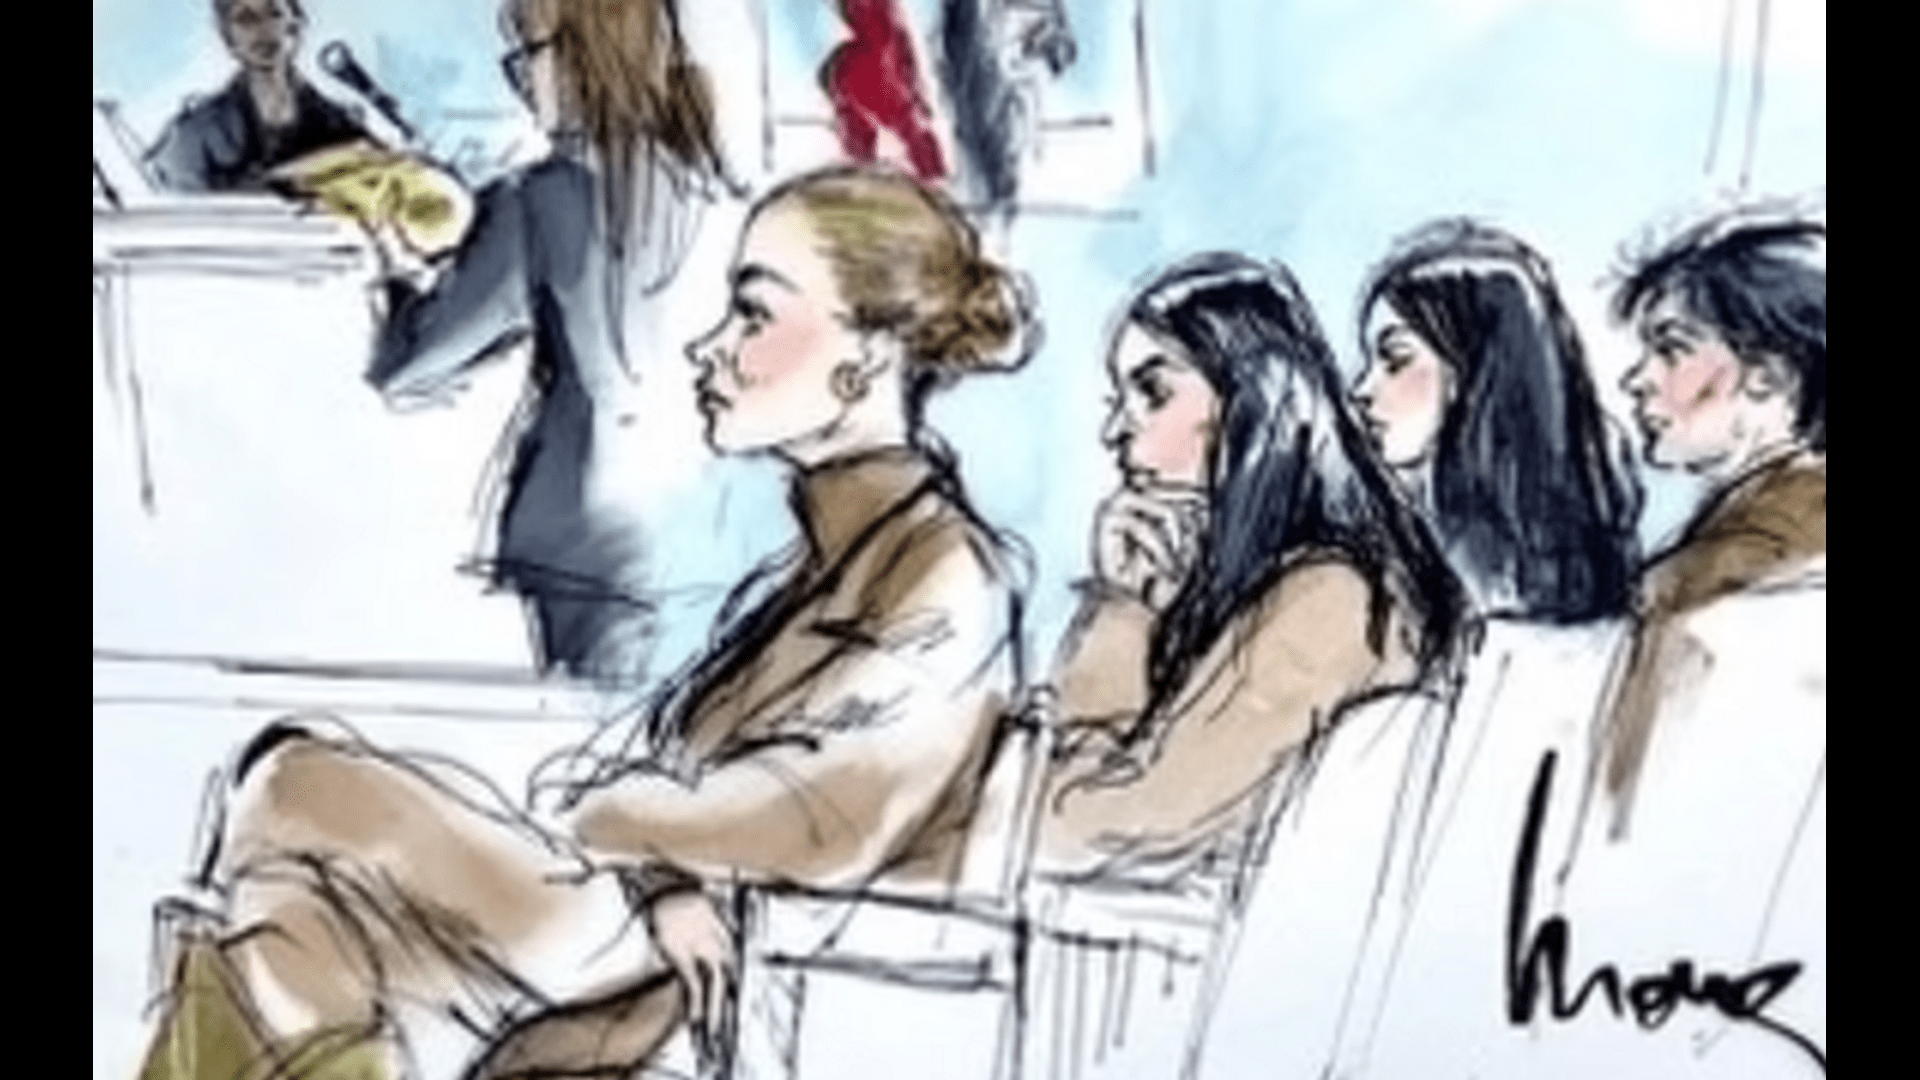 The Kardashian sisters are going to sue the artist who depicted them in a caricature